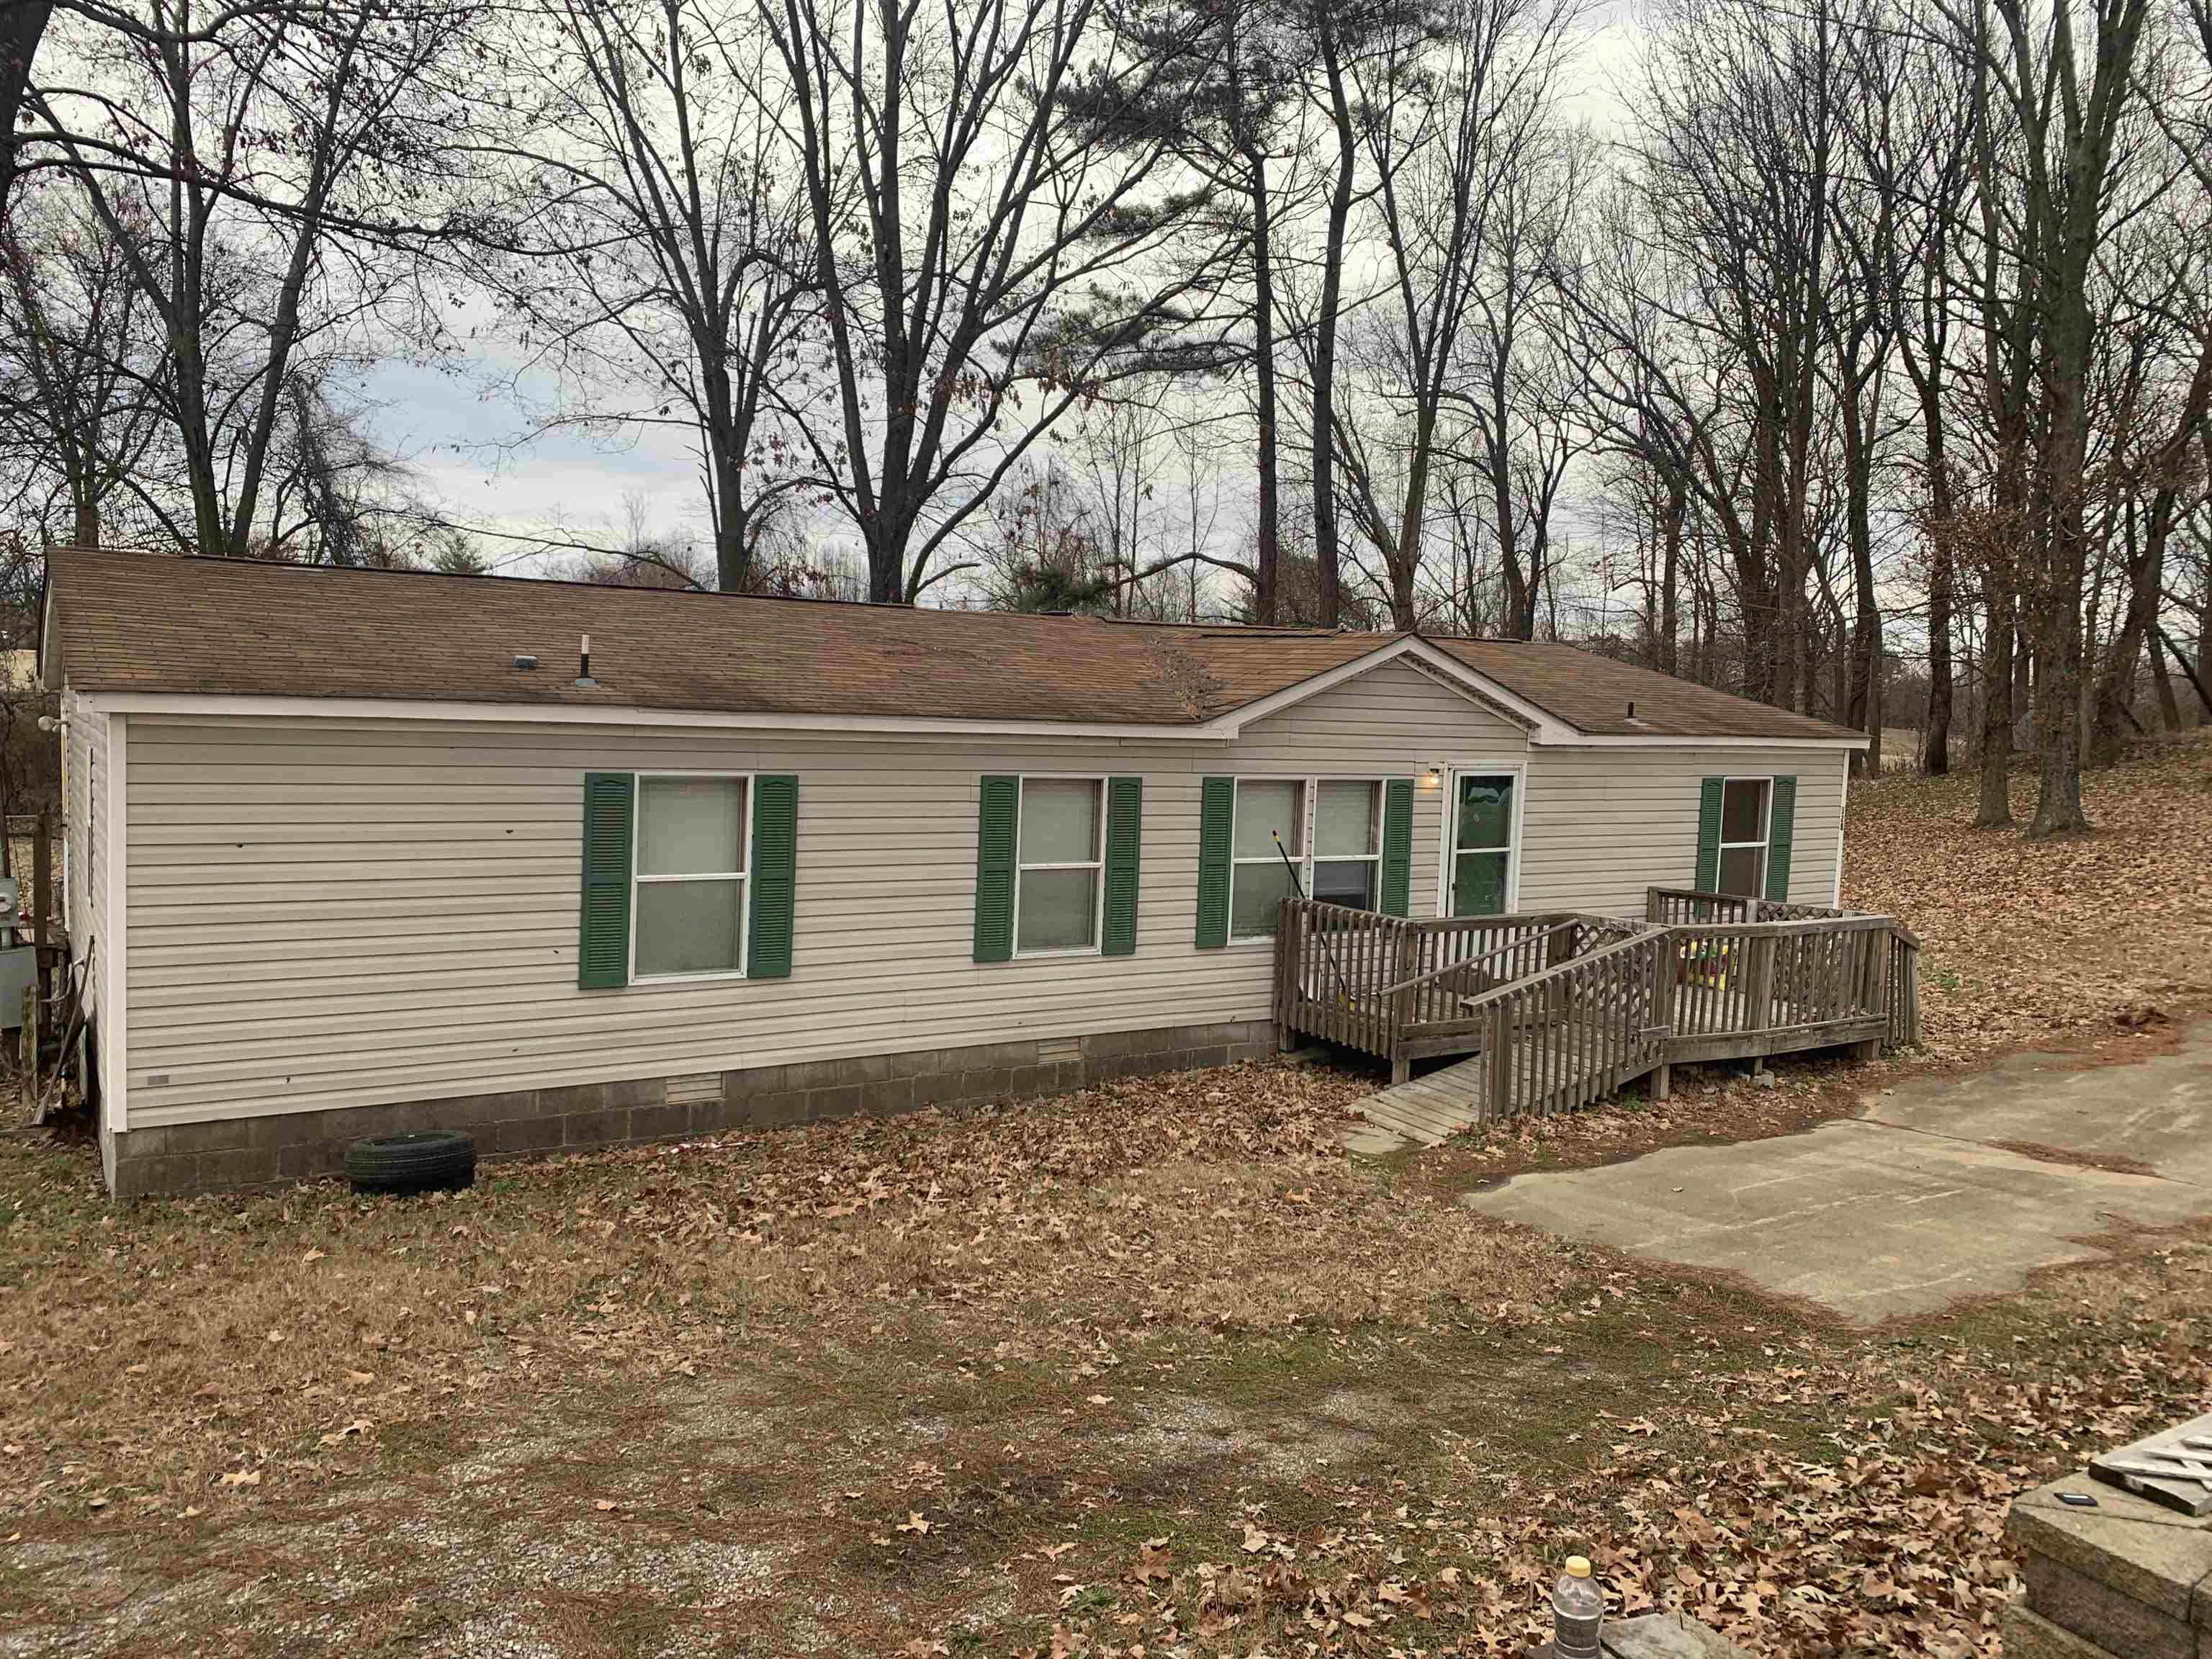 Cute 3 bedroom 2 bath mobile home. This home has new carpet and new vinyl plank flooring.. Large open floor plan, gas fireplace & new bathroom vanities.  Call Missy Thurmond 731-676-7686